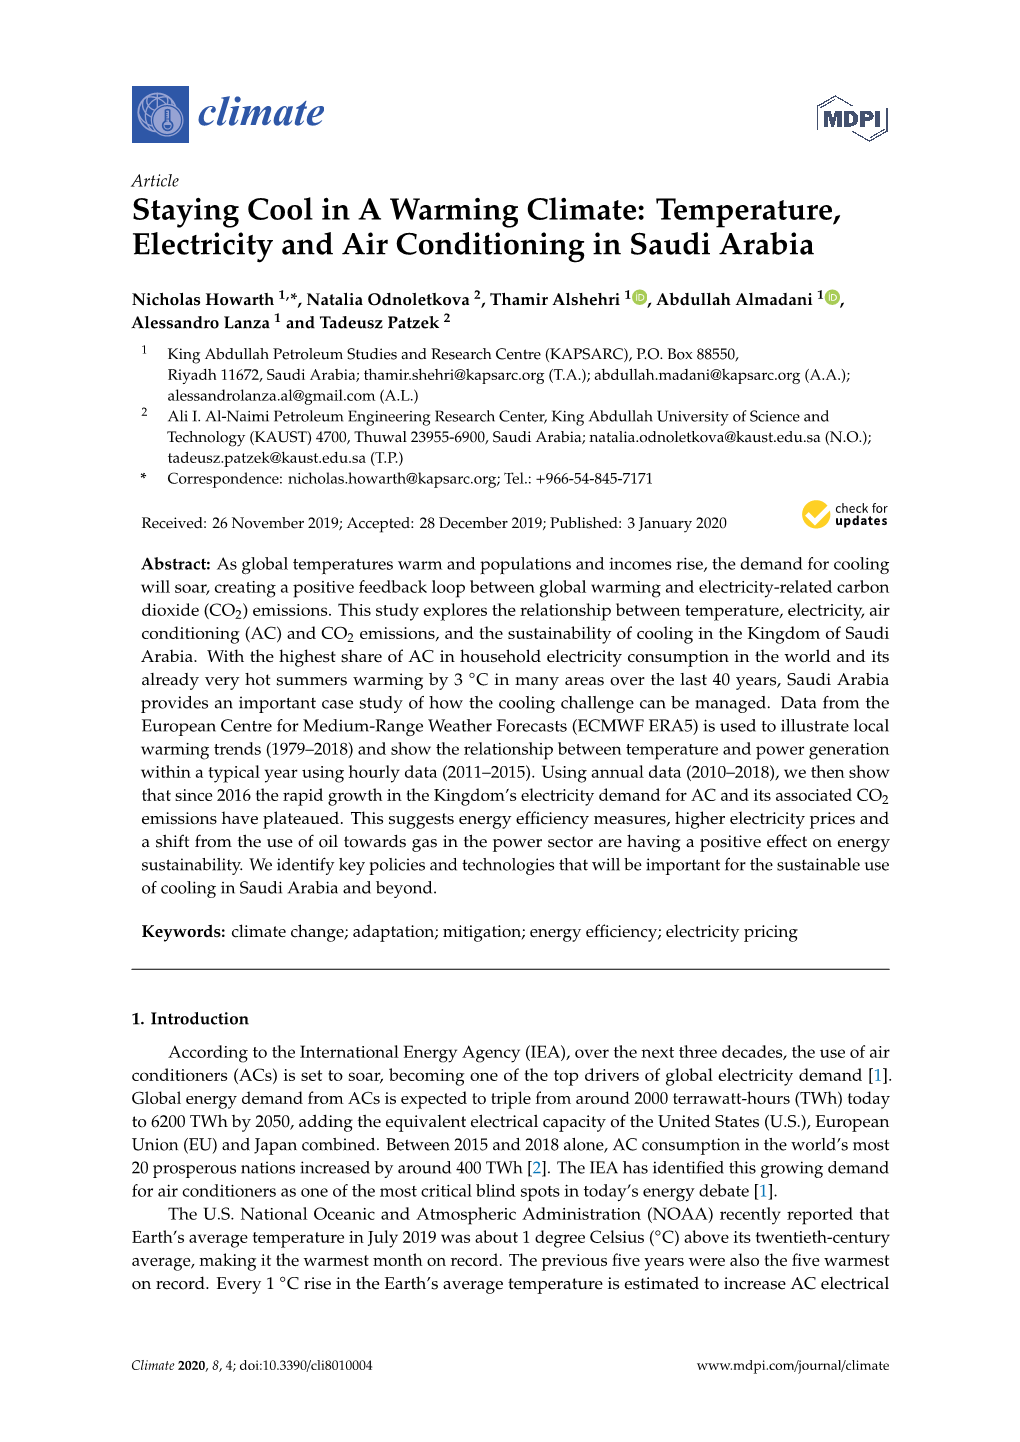 Staying Cool in a Warming Climate: Temperature, Electricity and Air Conditioning in Saudi Arabia